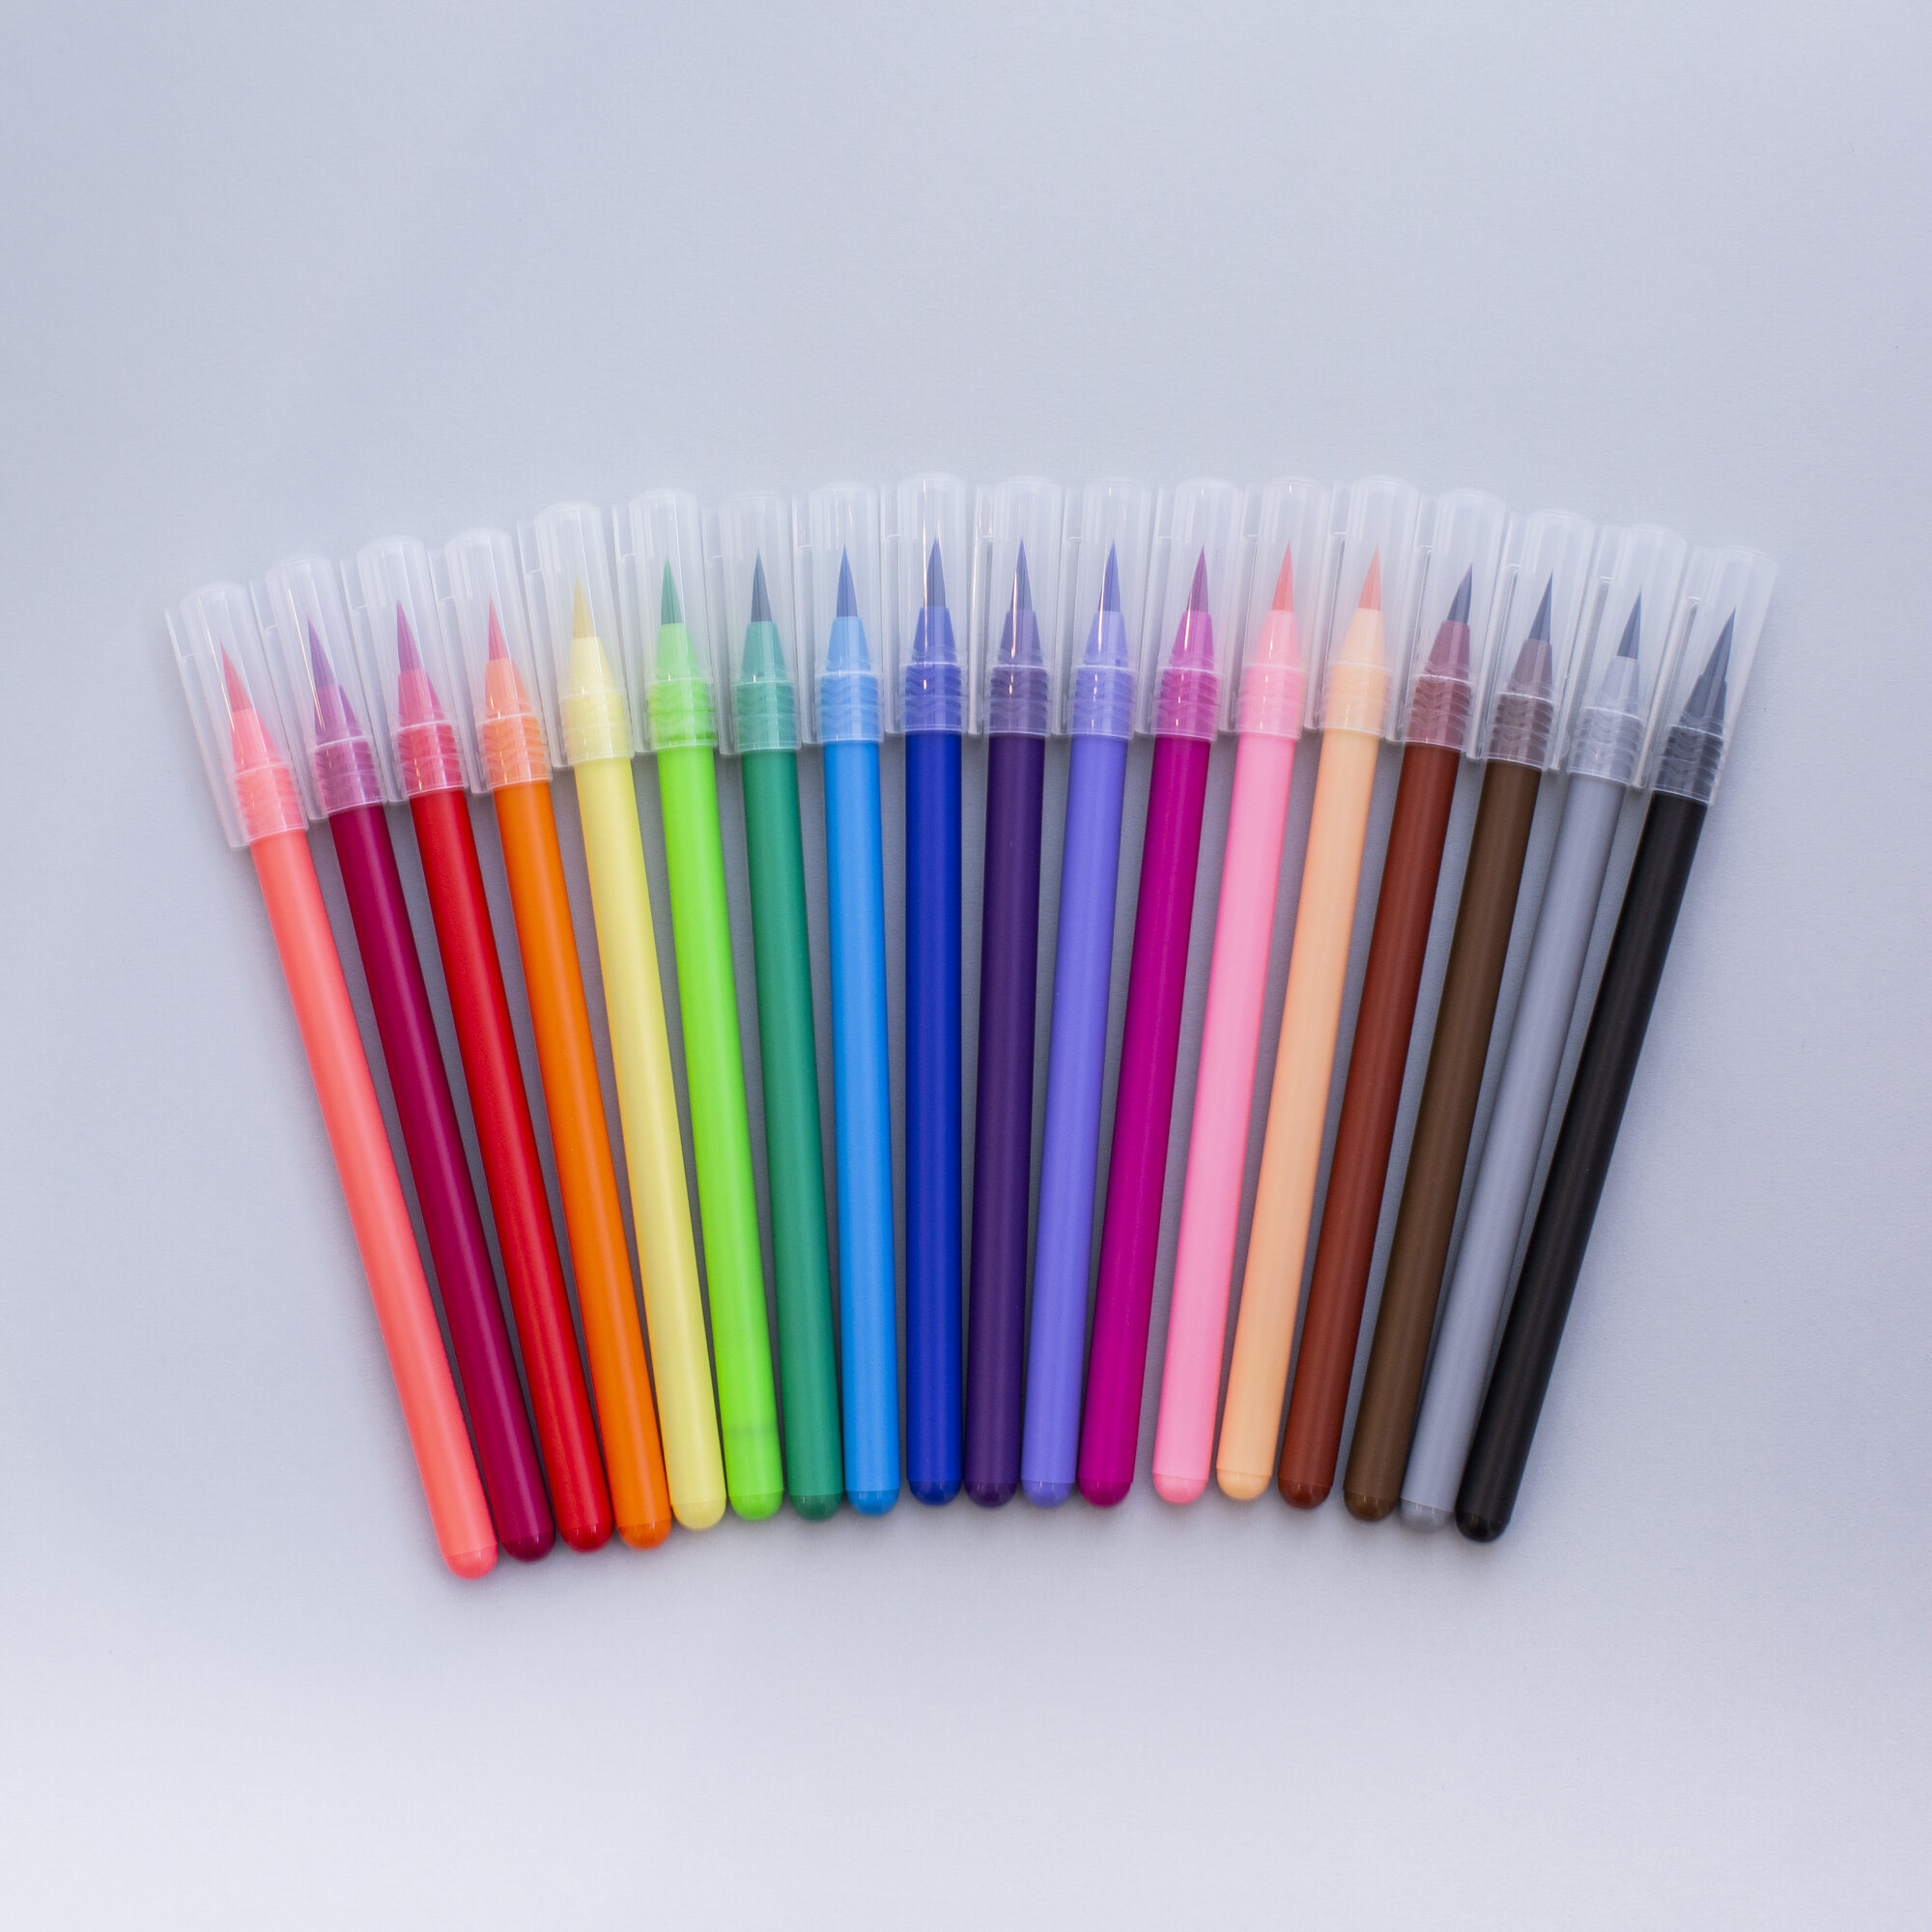 Ooly Unmistakeables Colored Pencil Set of 12